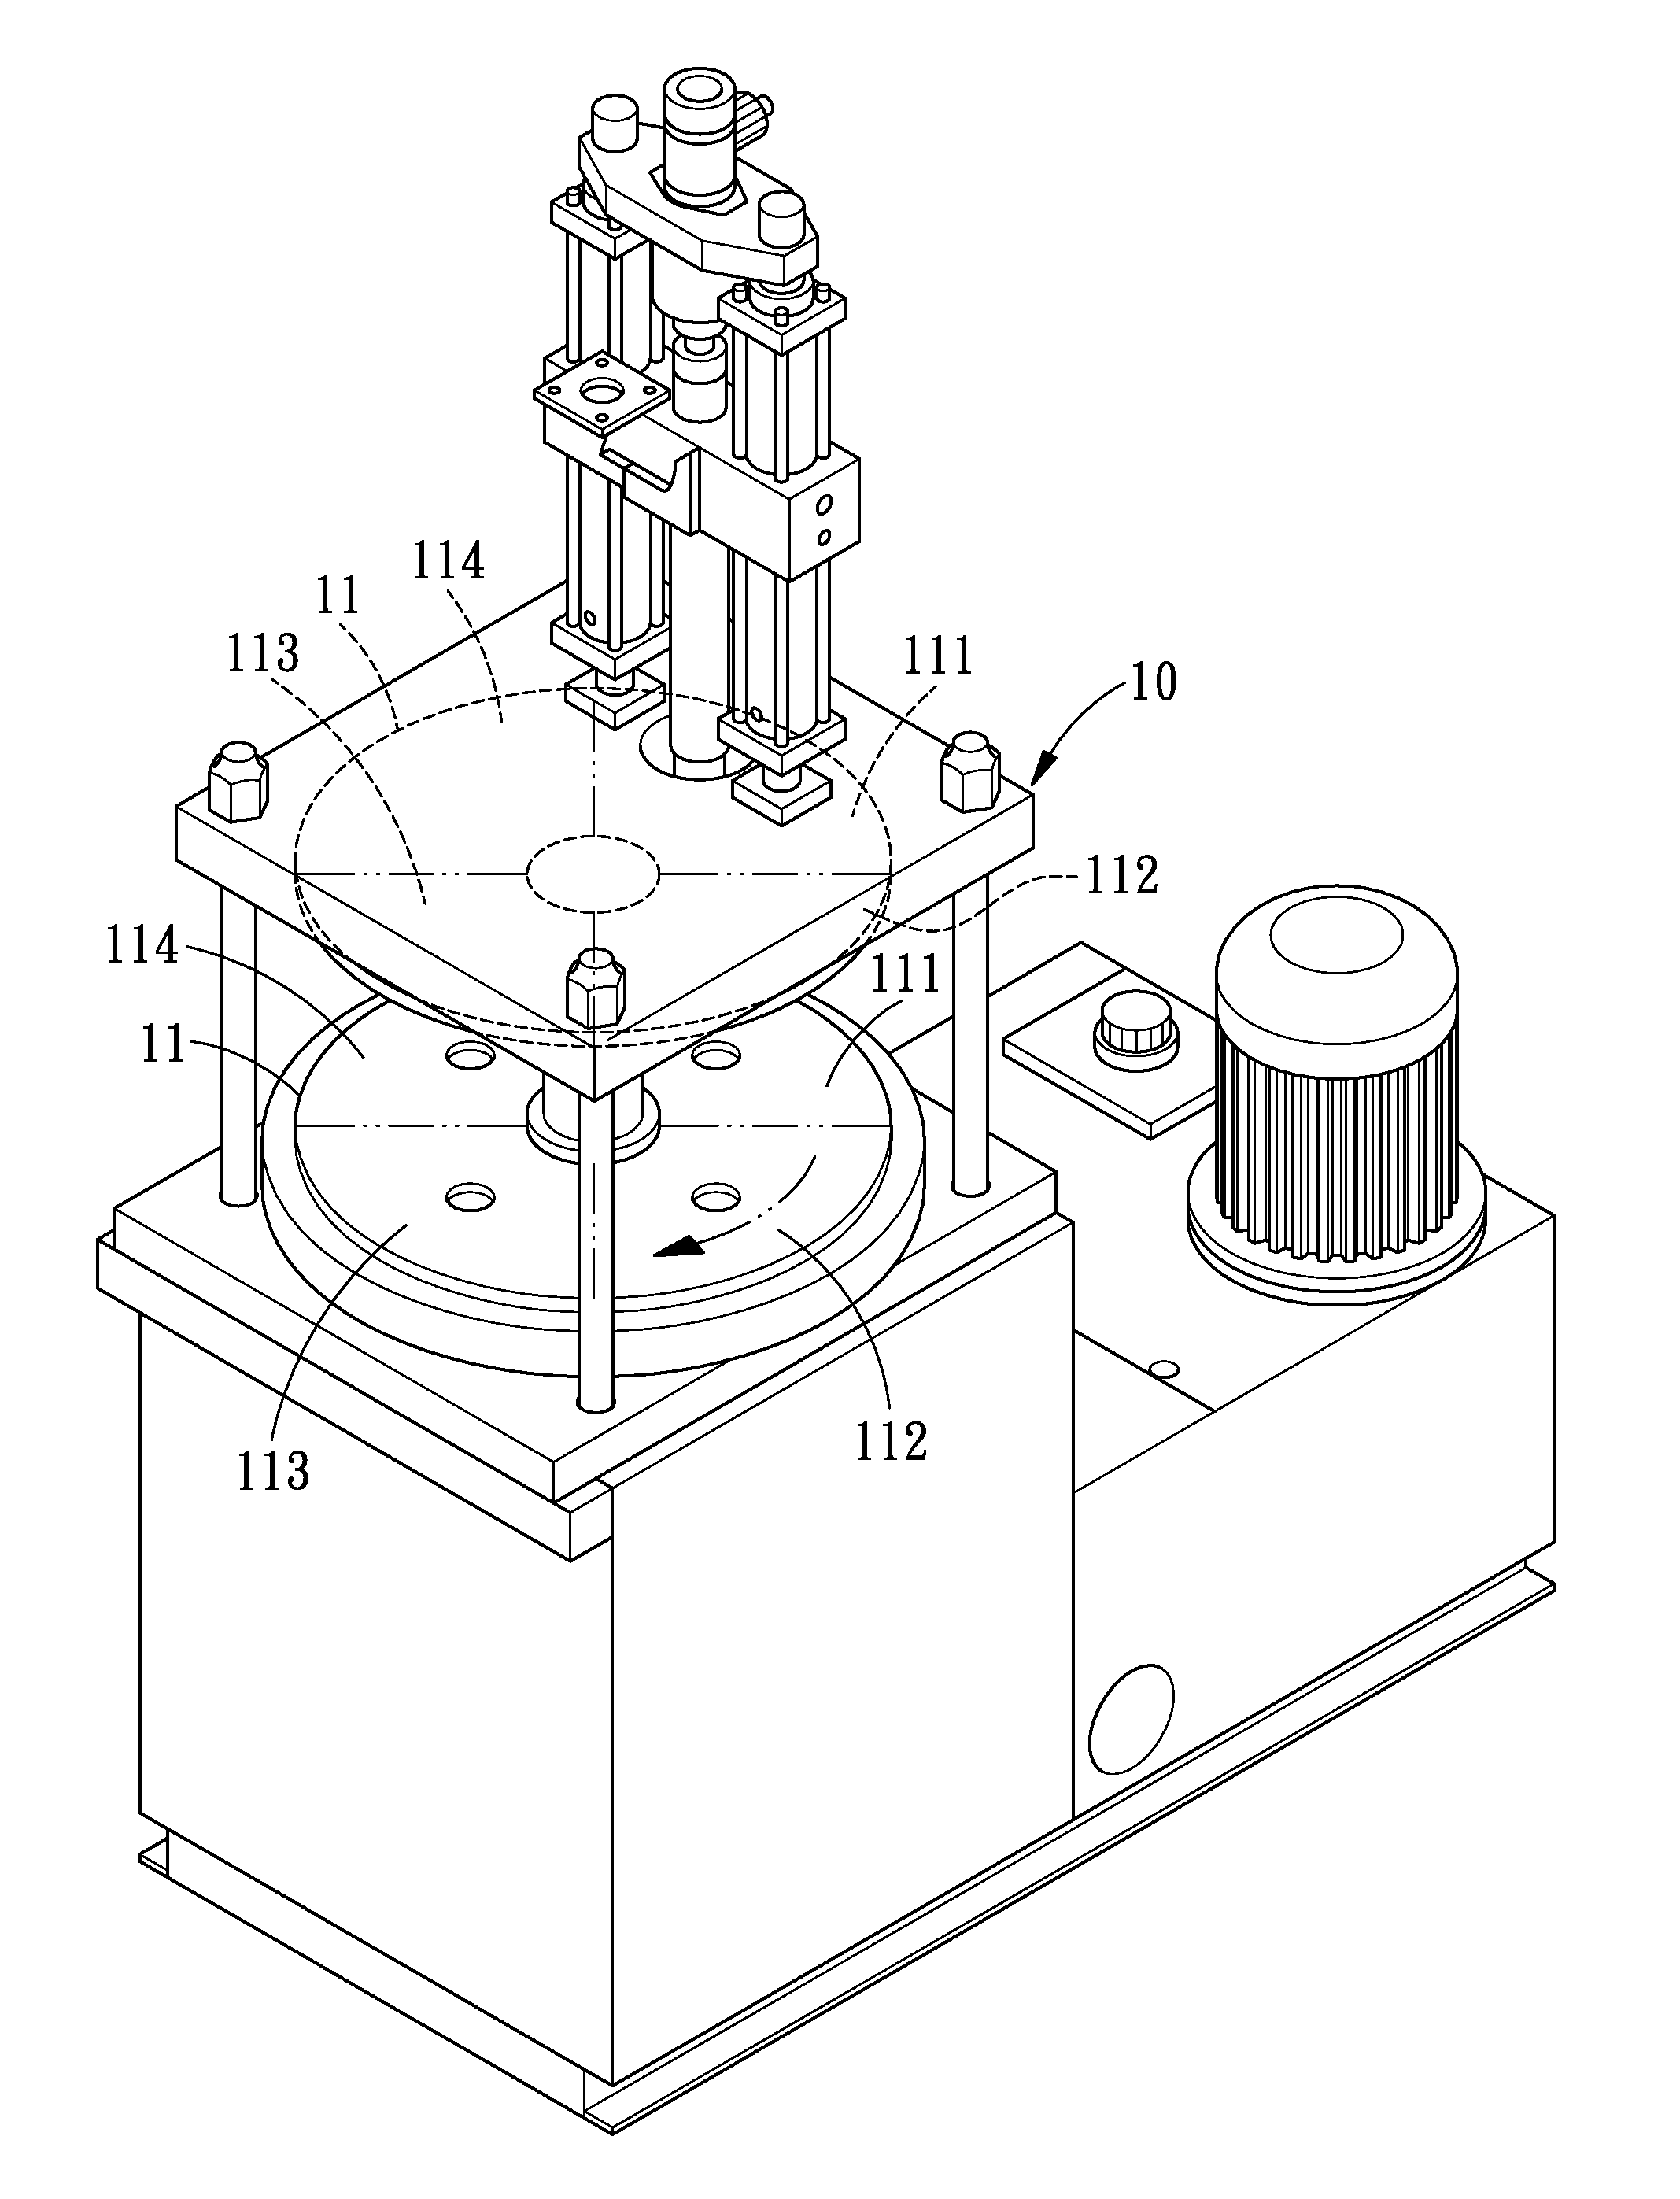 Processing method for in-mold coating integrative system